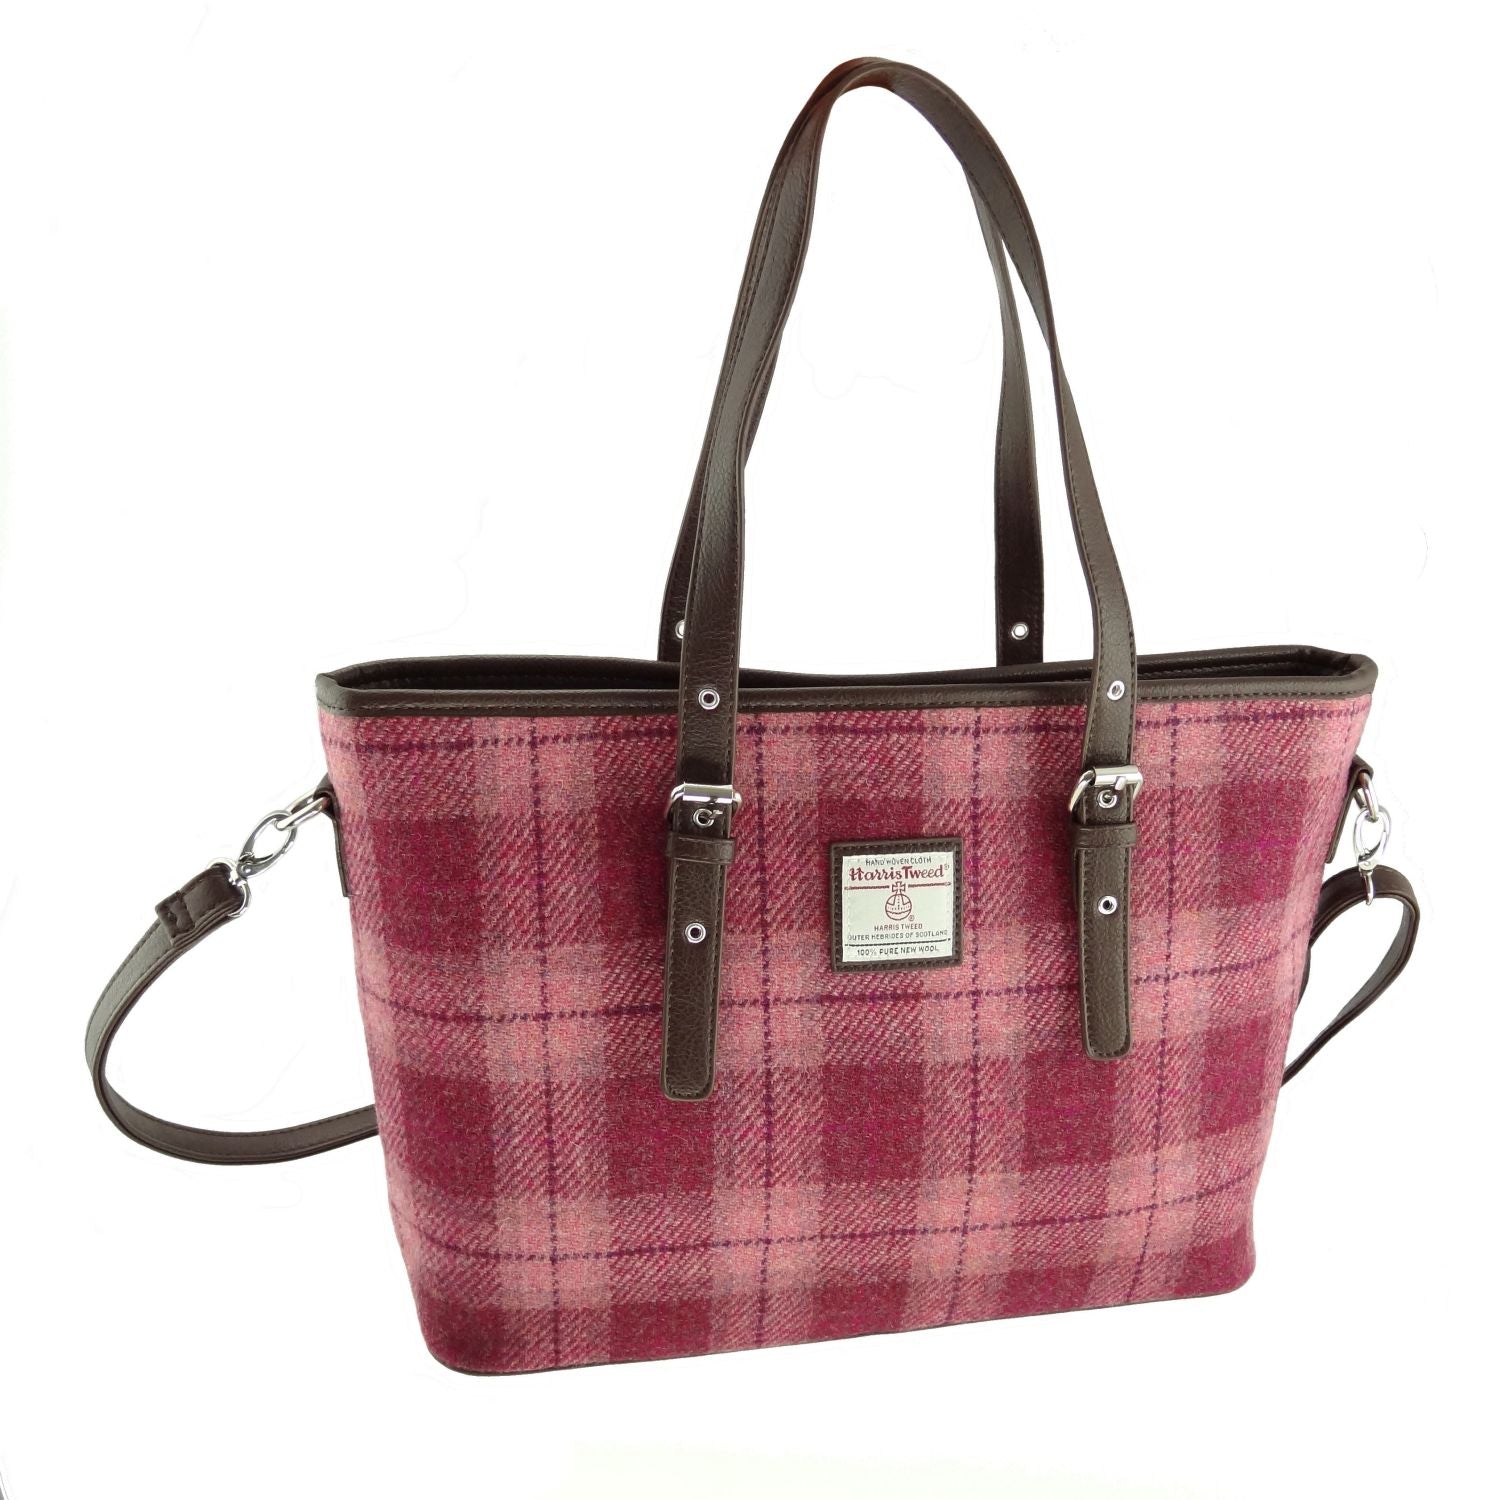 Cream Plaid Tote Bag by Rose Gold